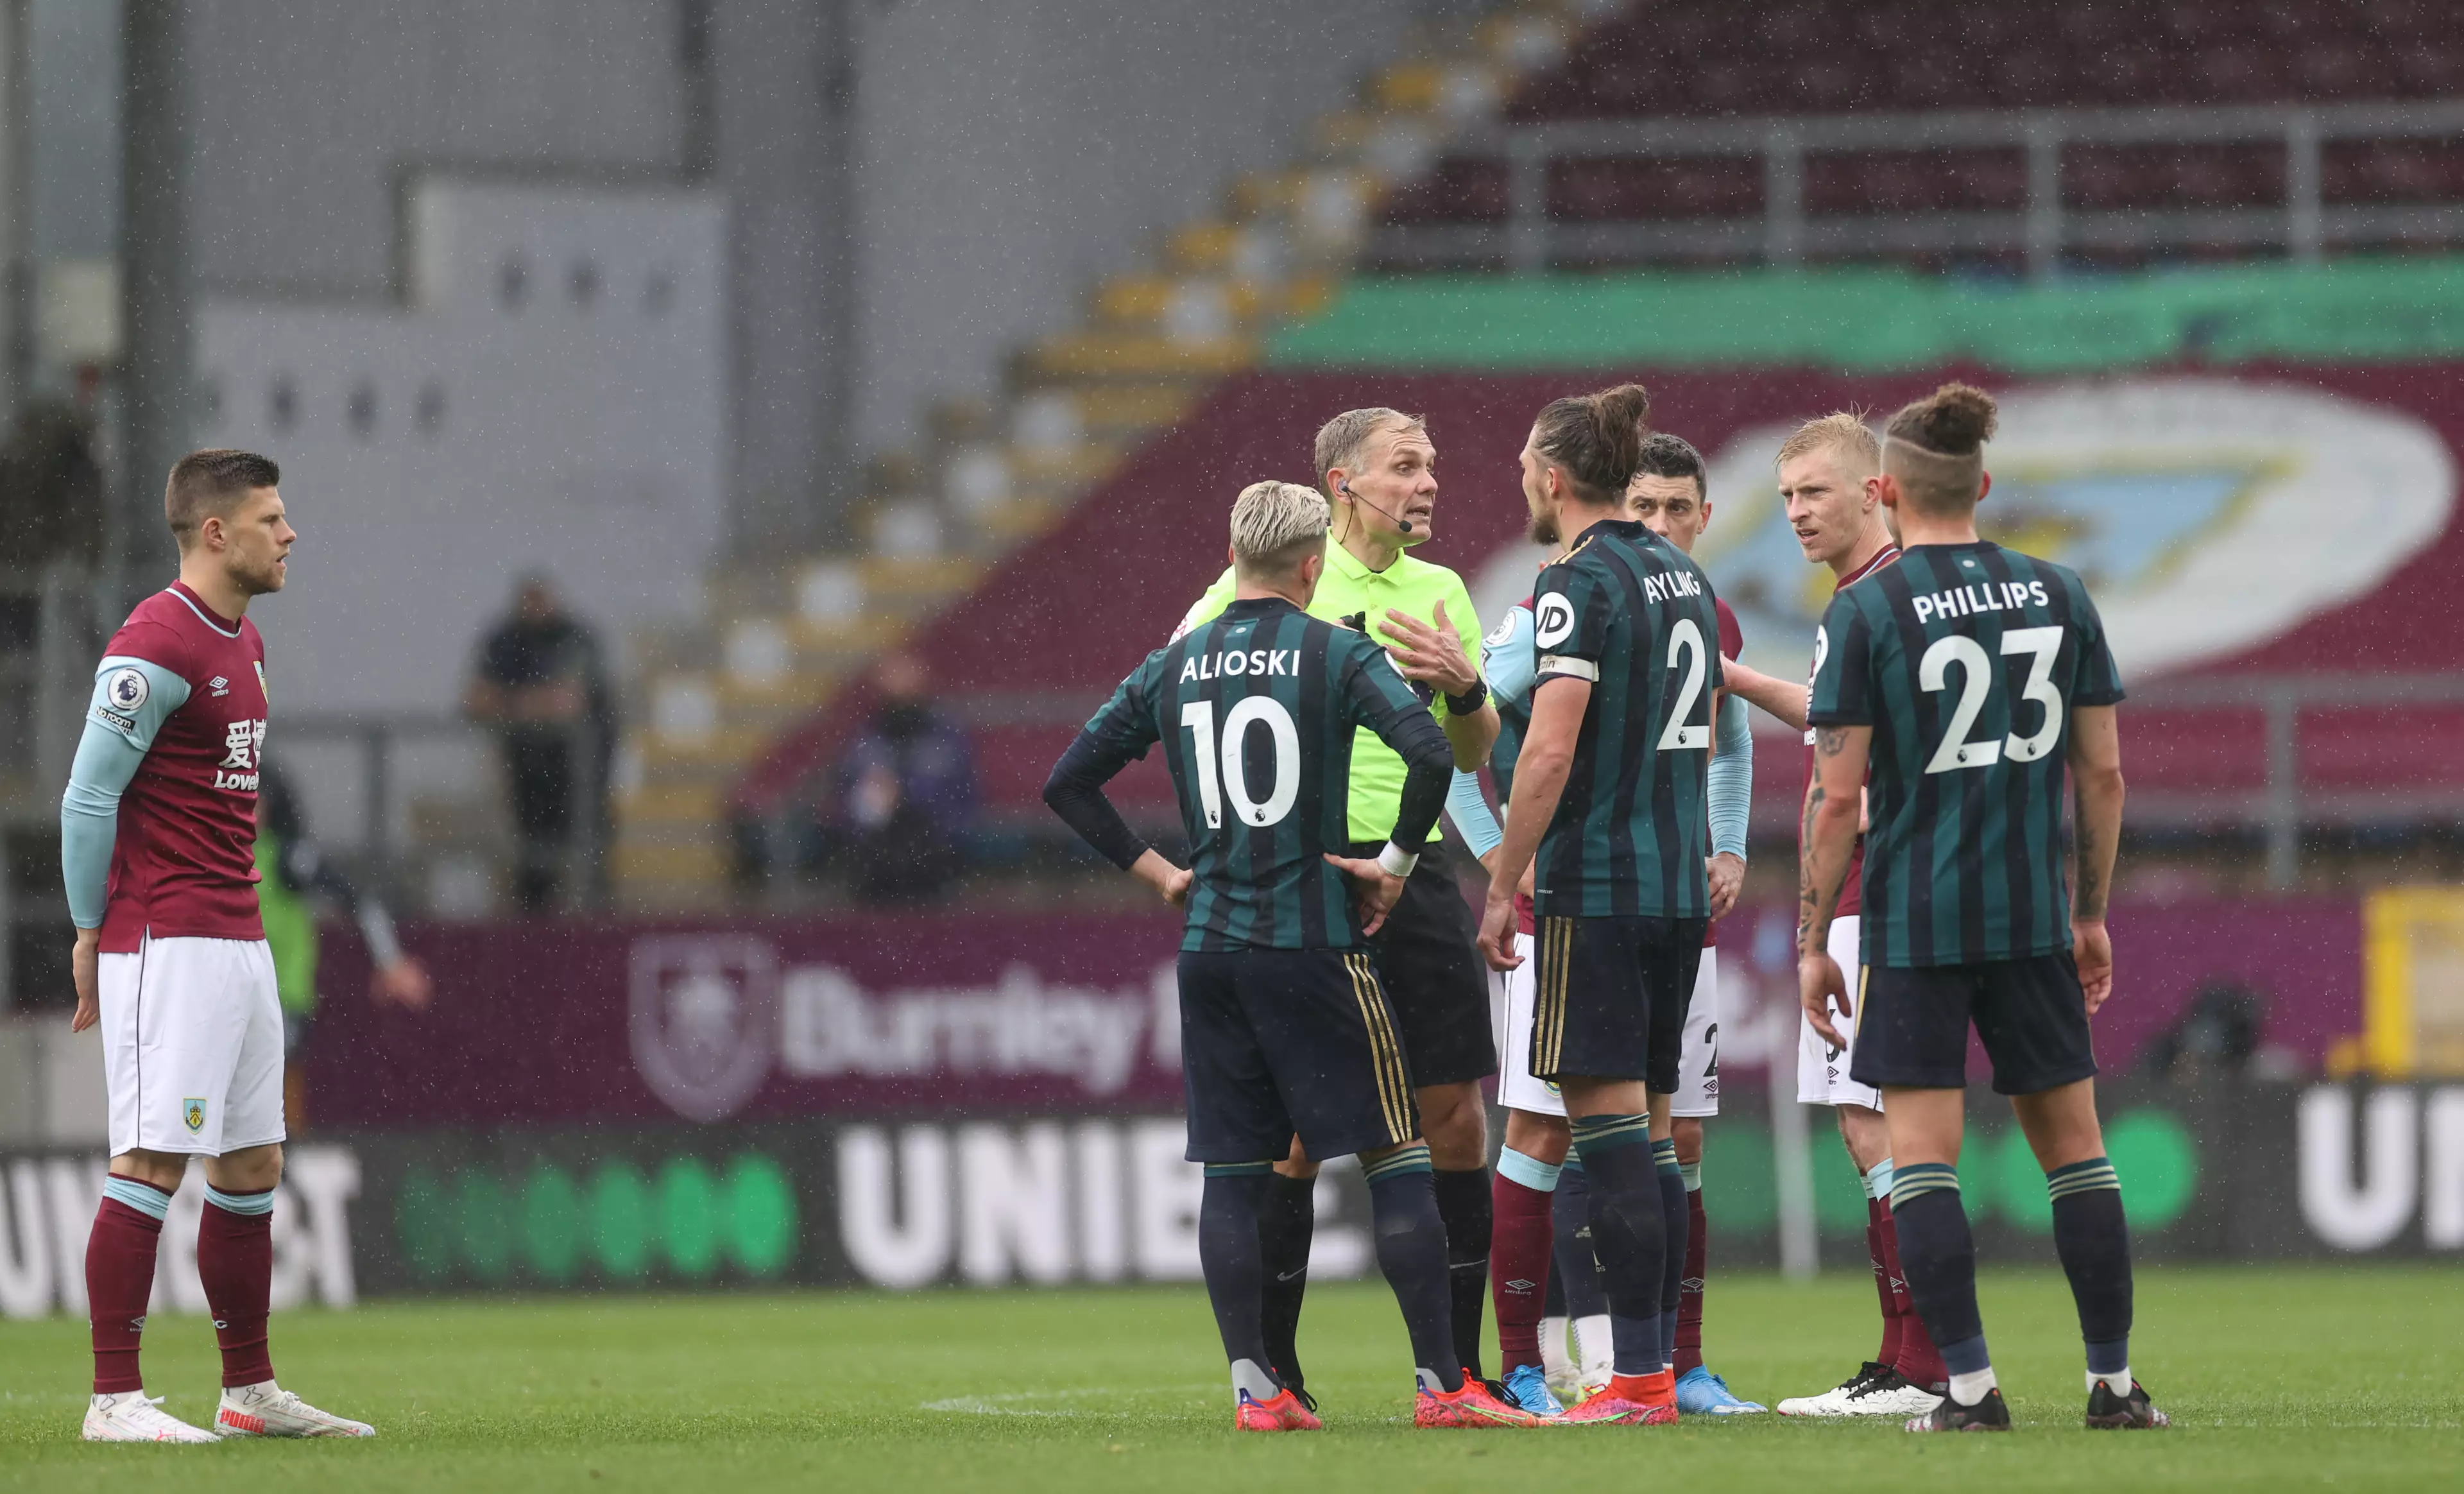 The referee speaks to Alioski and captain Luke Ayling during the game. Image: PA Images